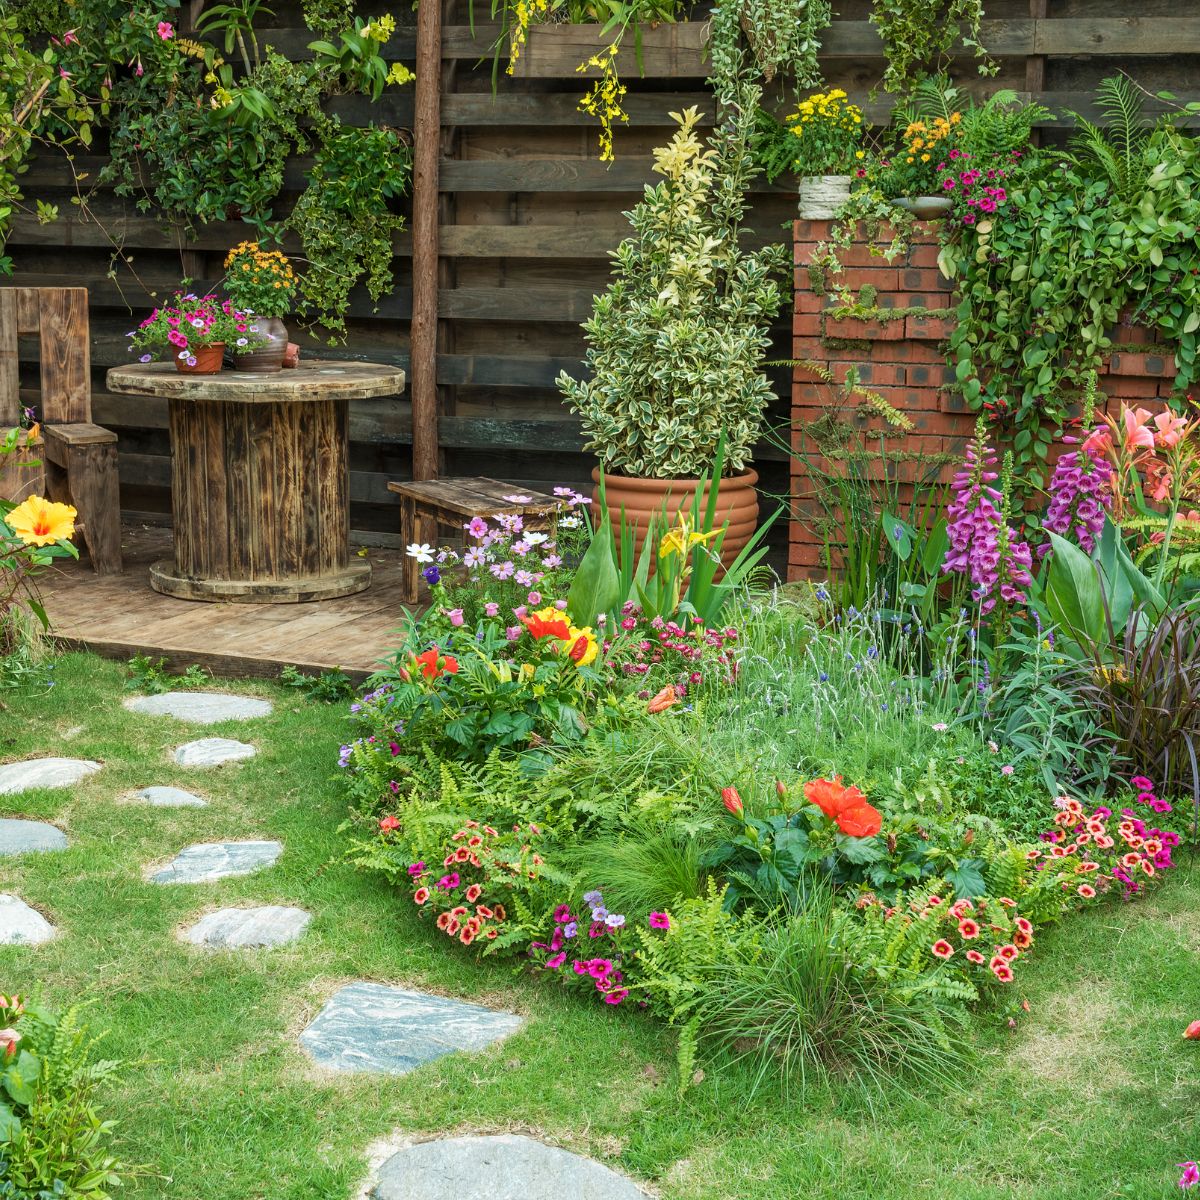 How To Have A Beautiful Yard On A Shoestring Budget